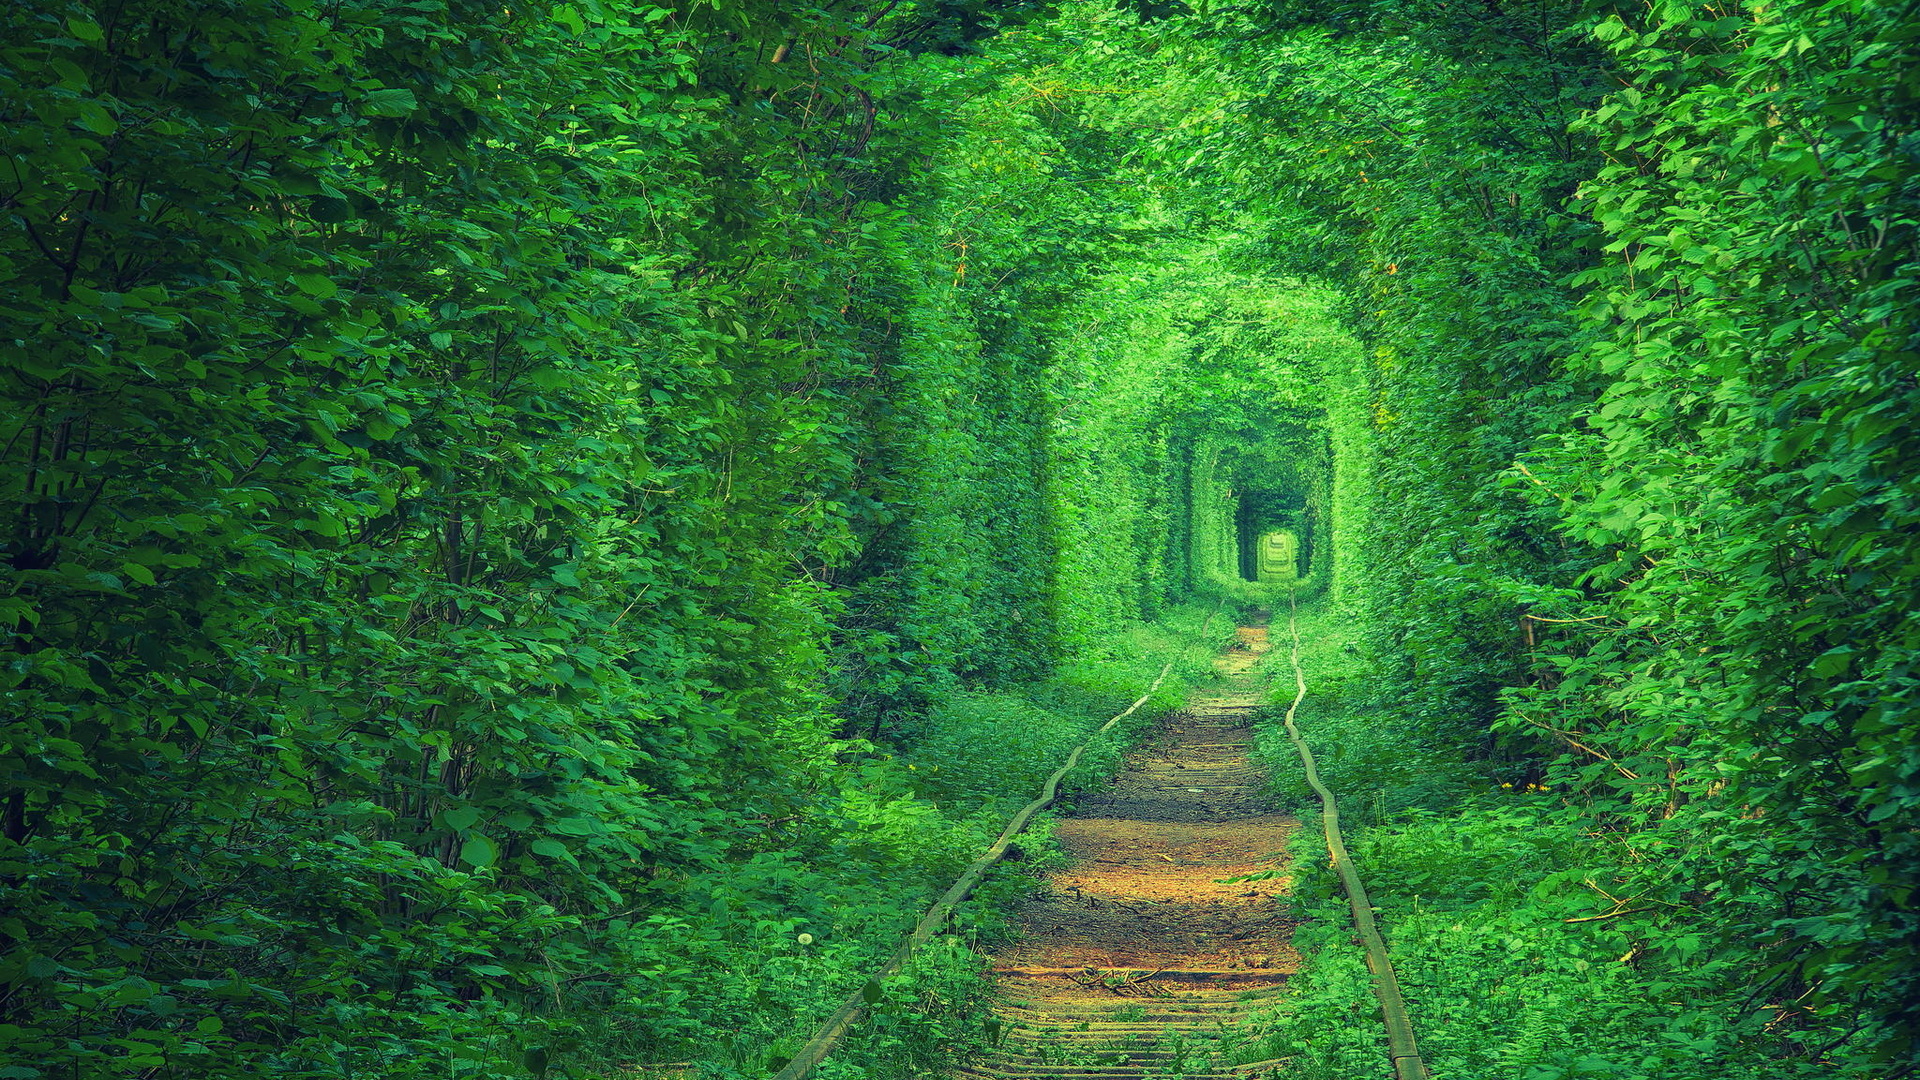 The Mysterious Tunnel of Love